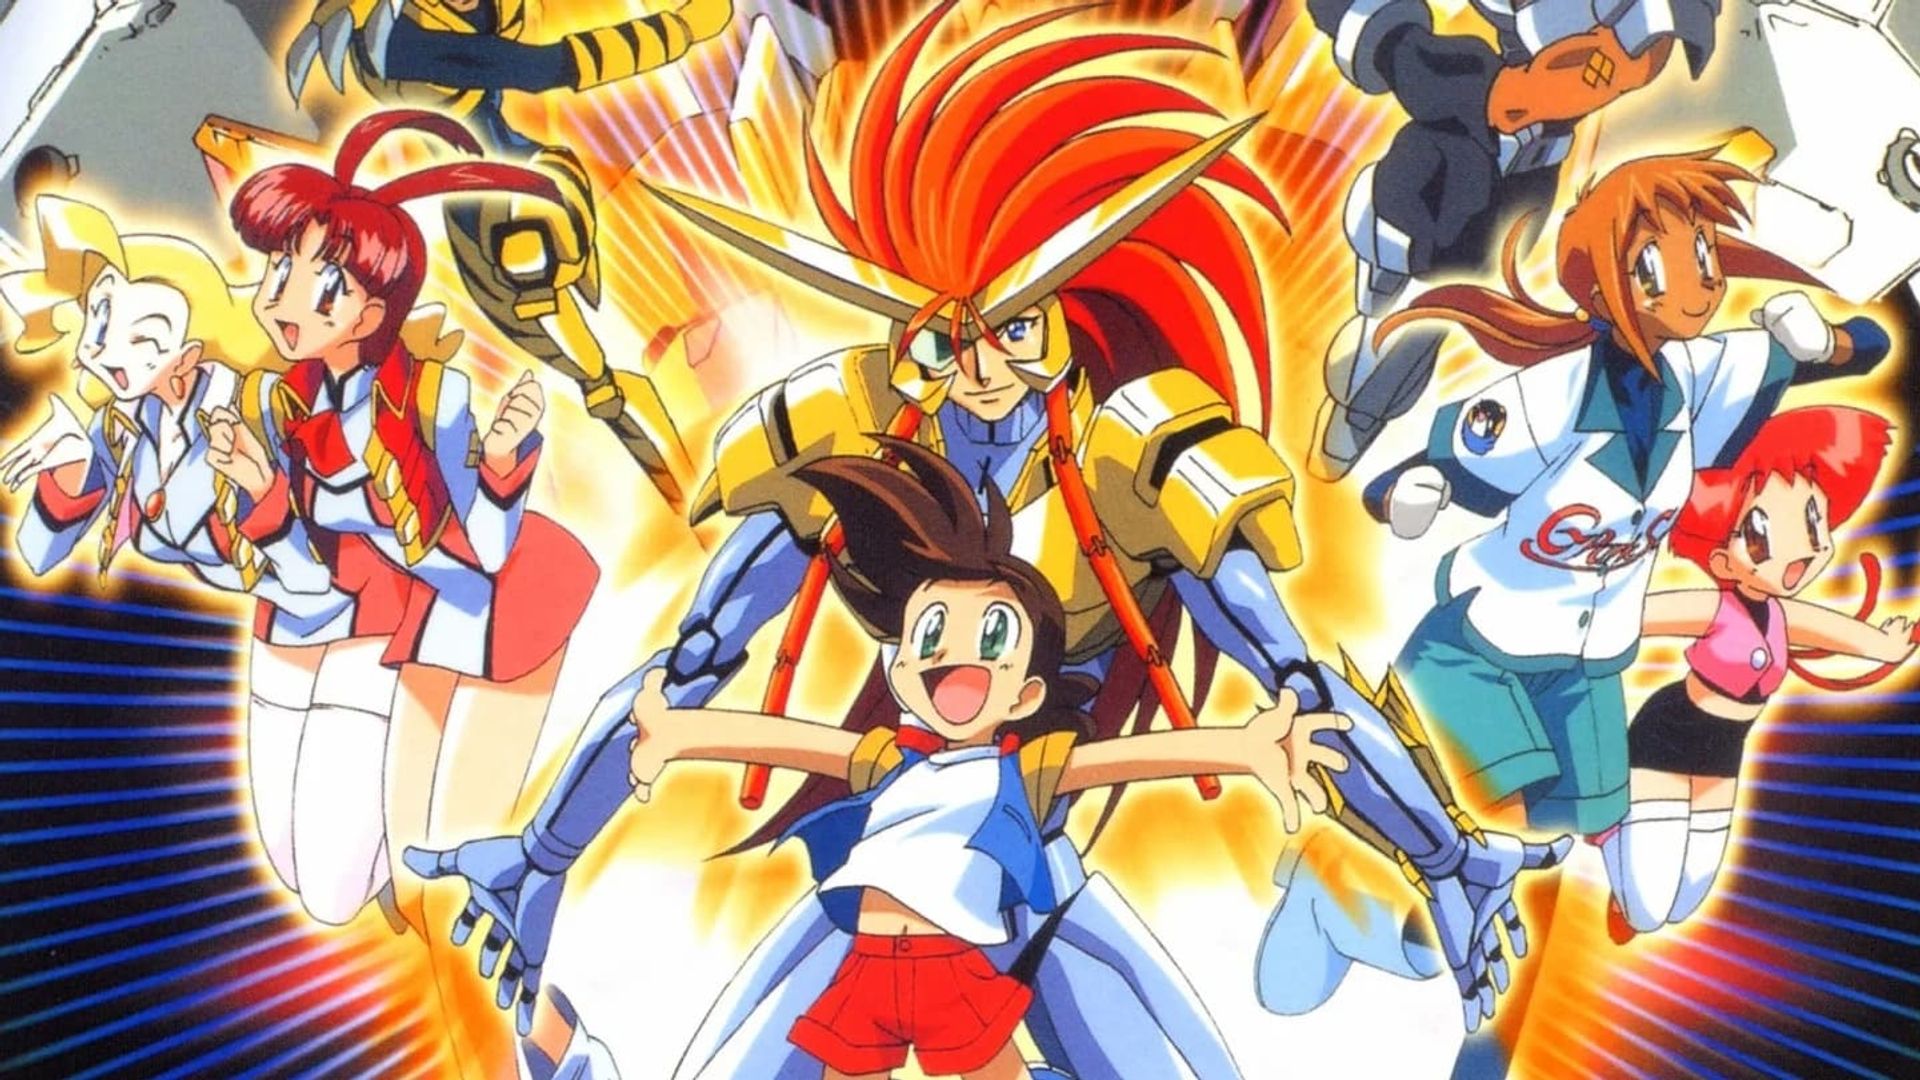 King of the Braves GaoGaiGar background